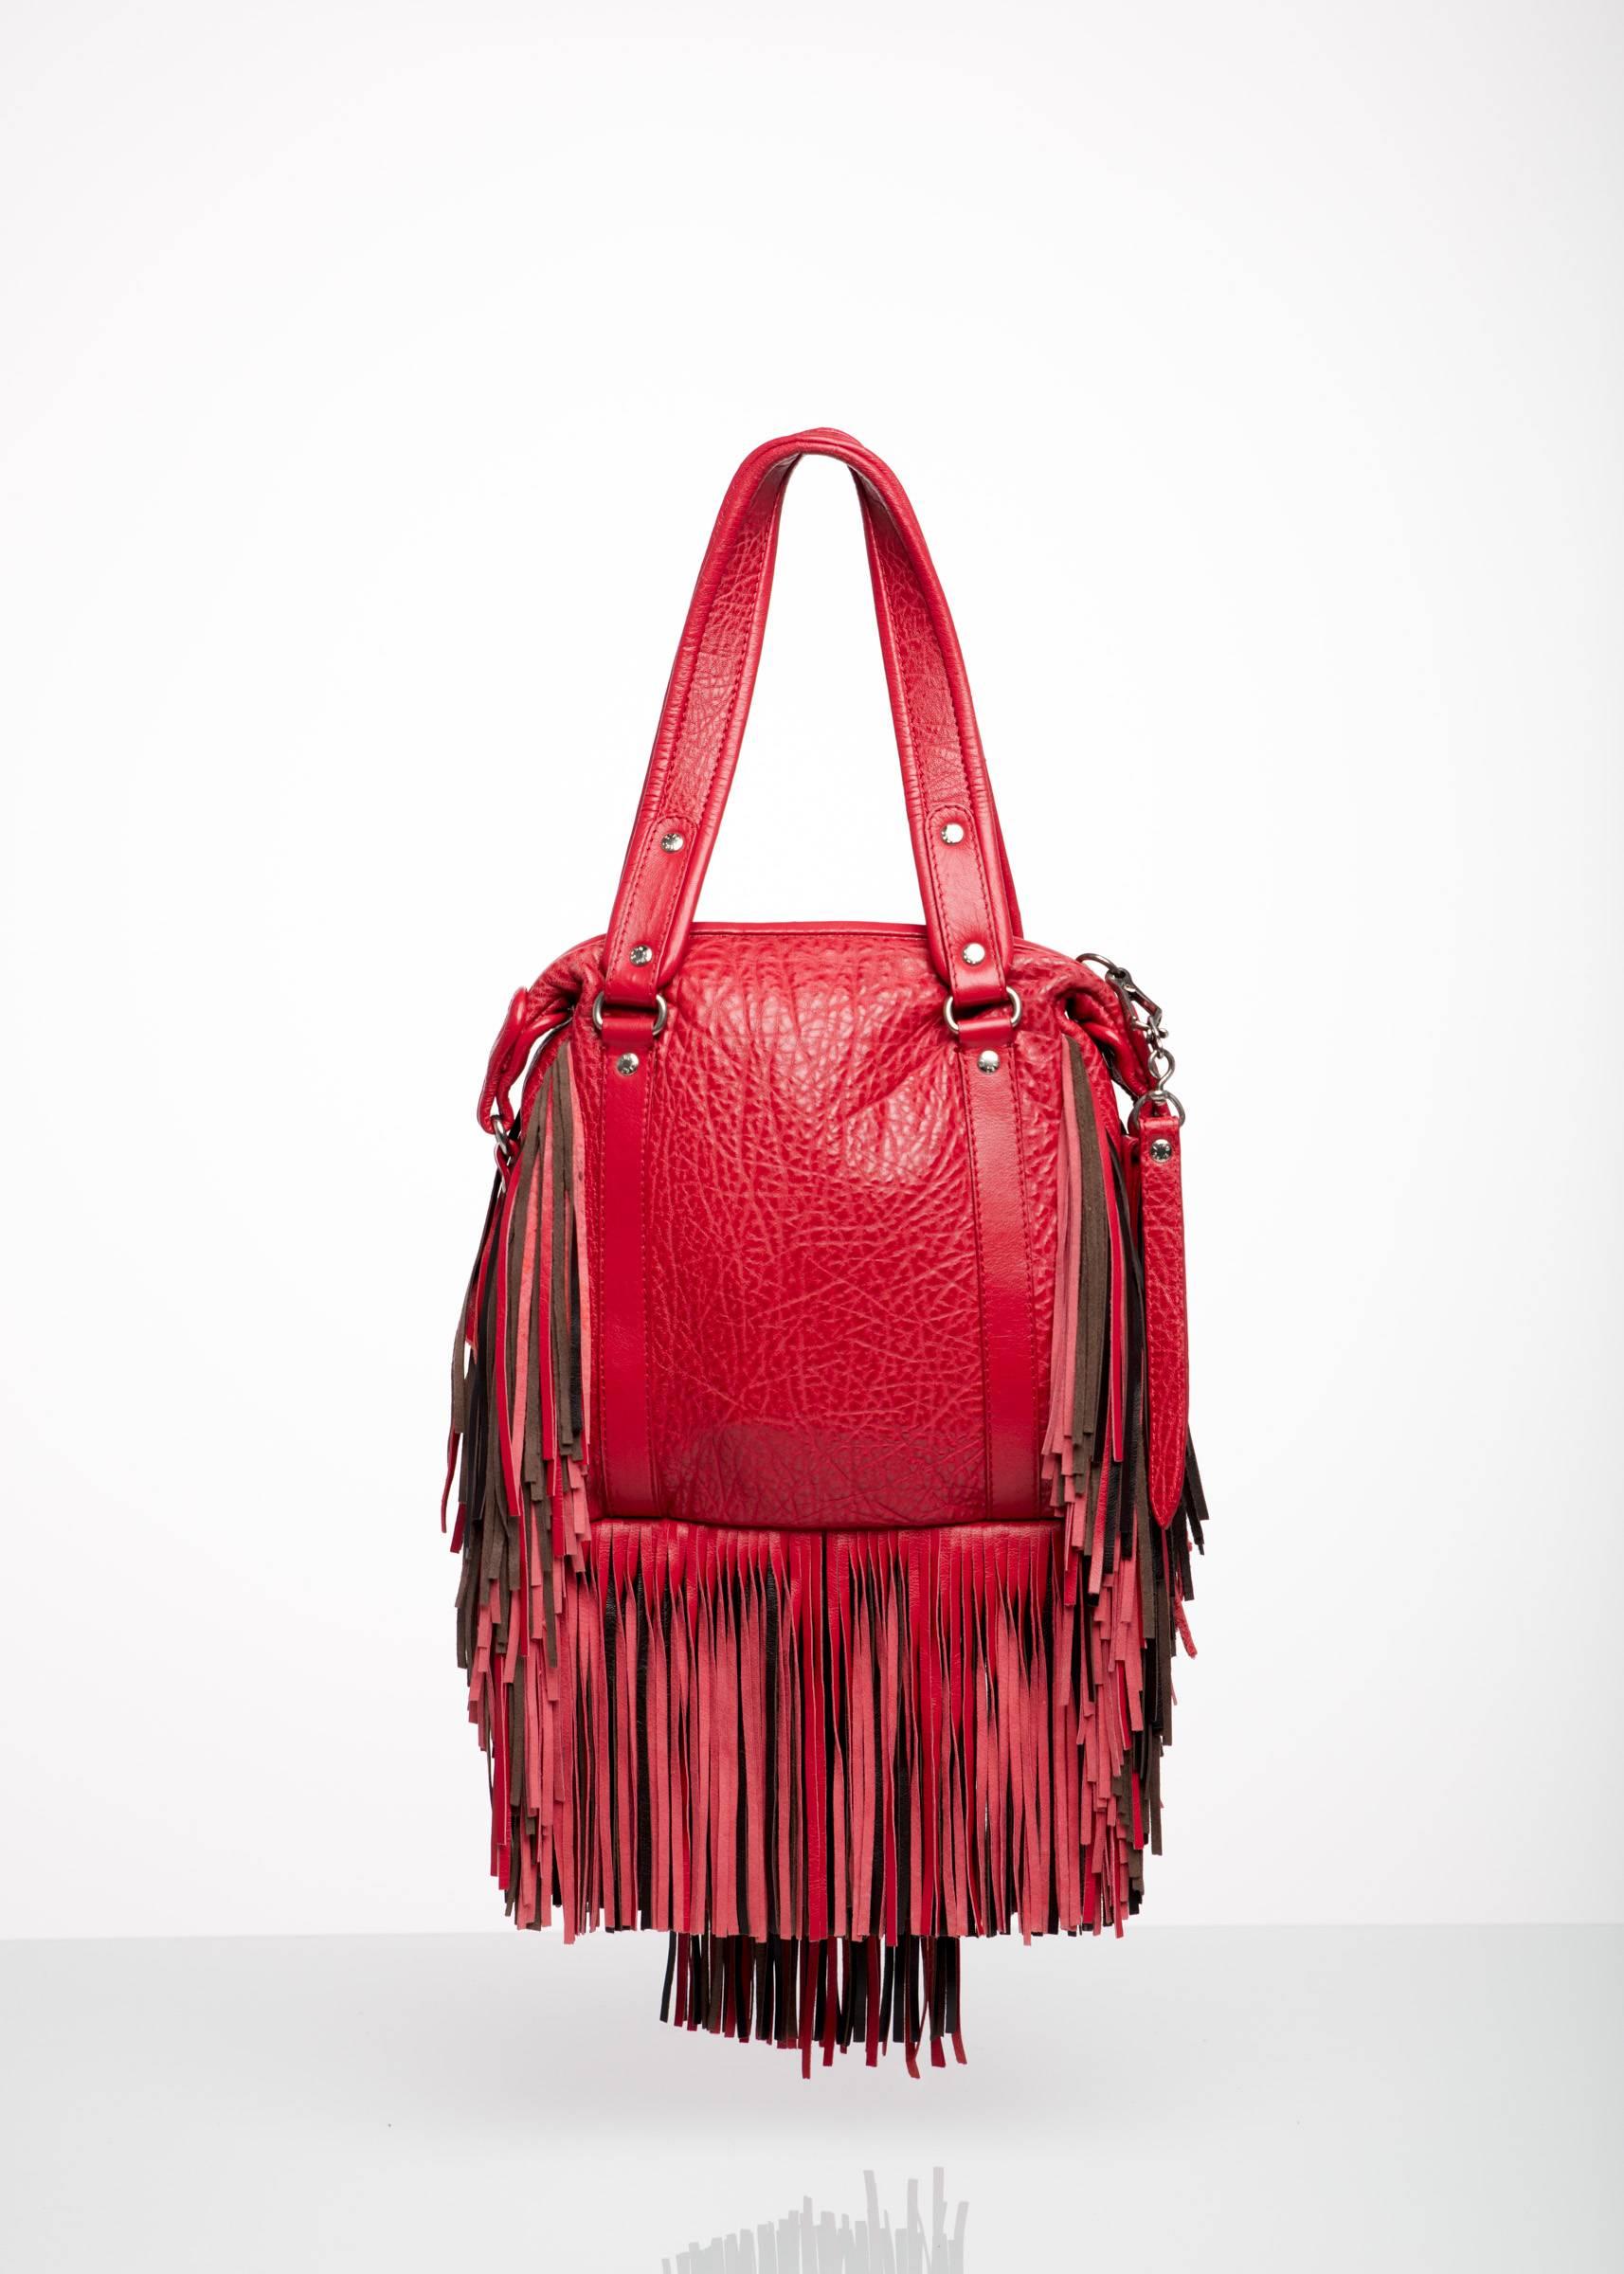 2008 Etro Runway Campaign Red Leather Fringe Shoulder Bag In Excellent Condition In Boca Raton, FL